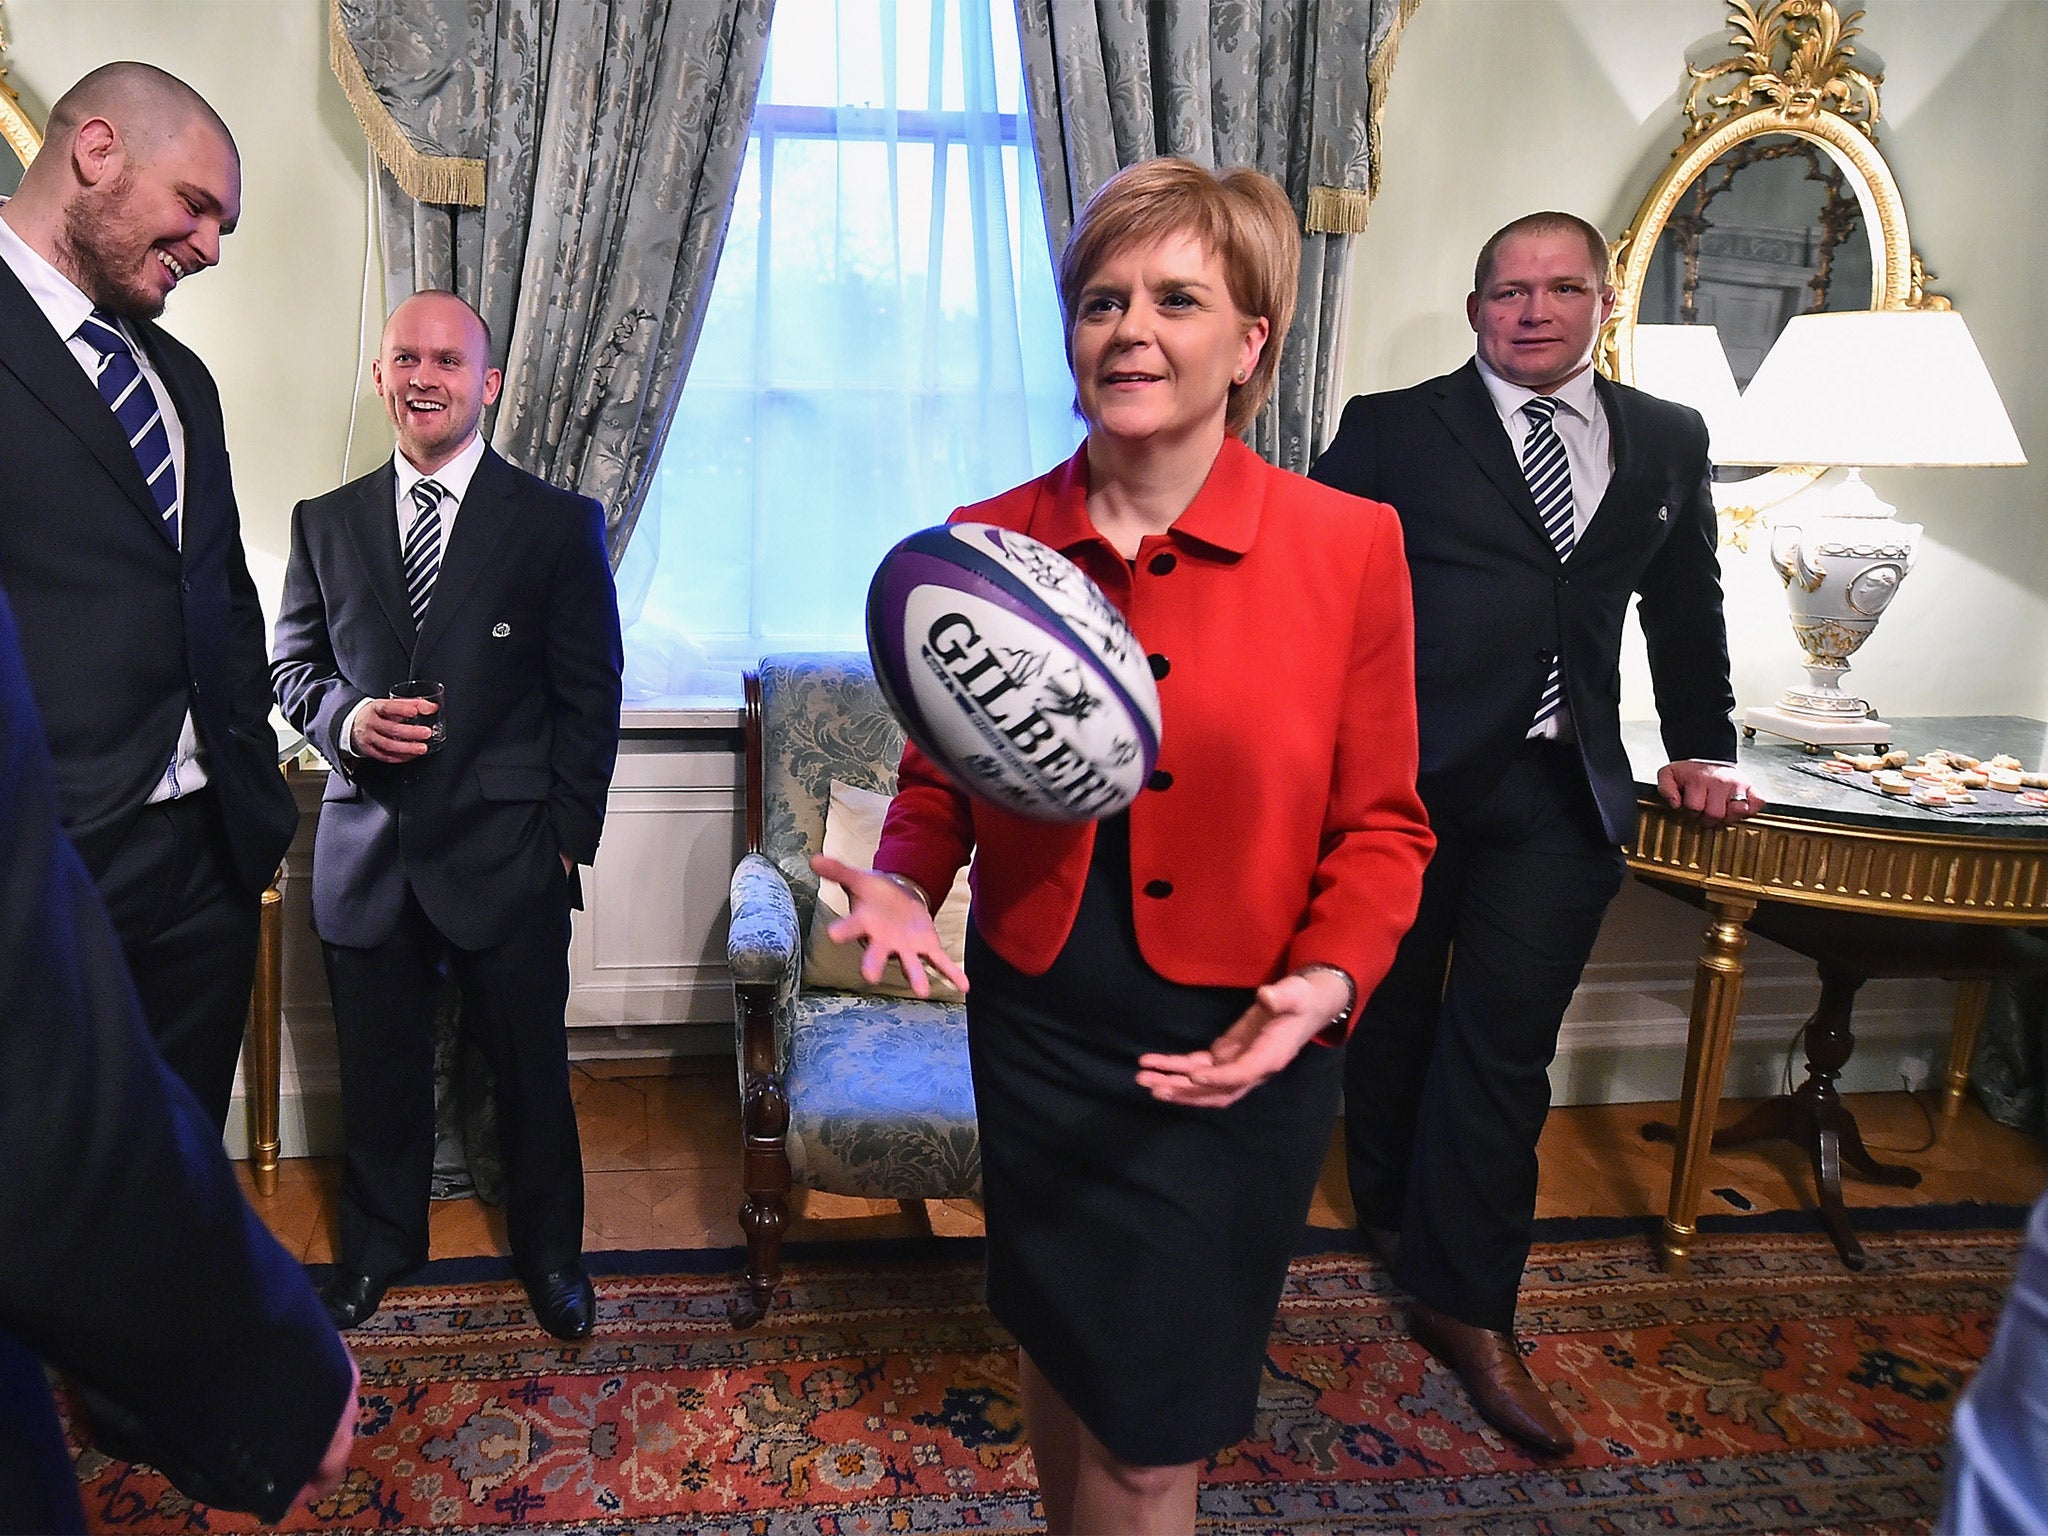 First Minister Nicola Sturgeon met the Scotland rugby team at Bute House on Tuesday